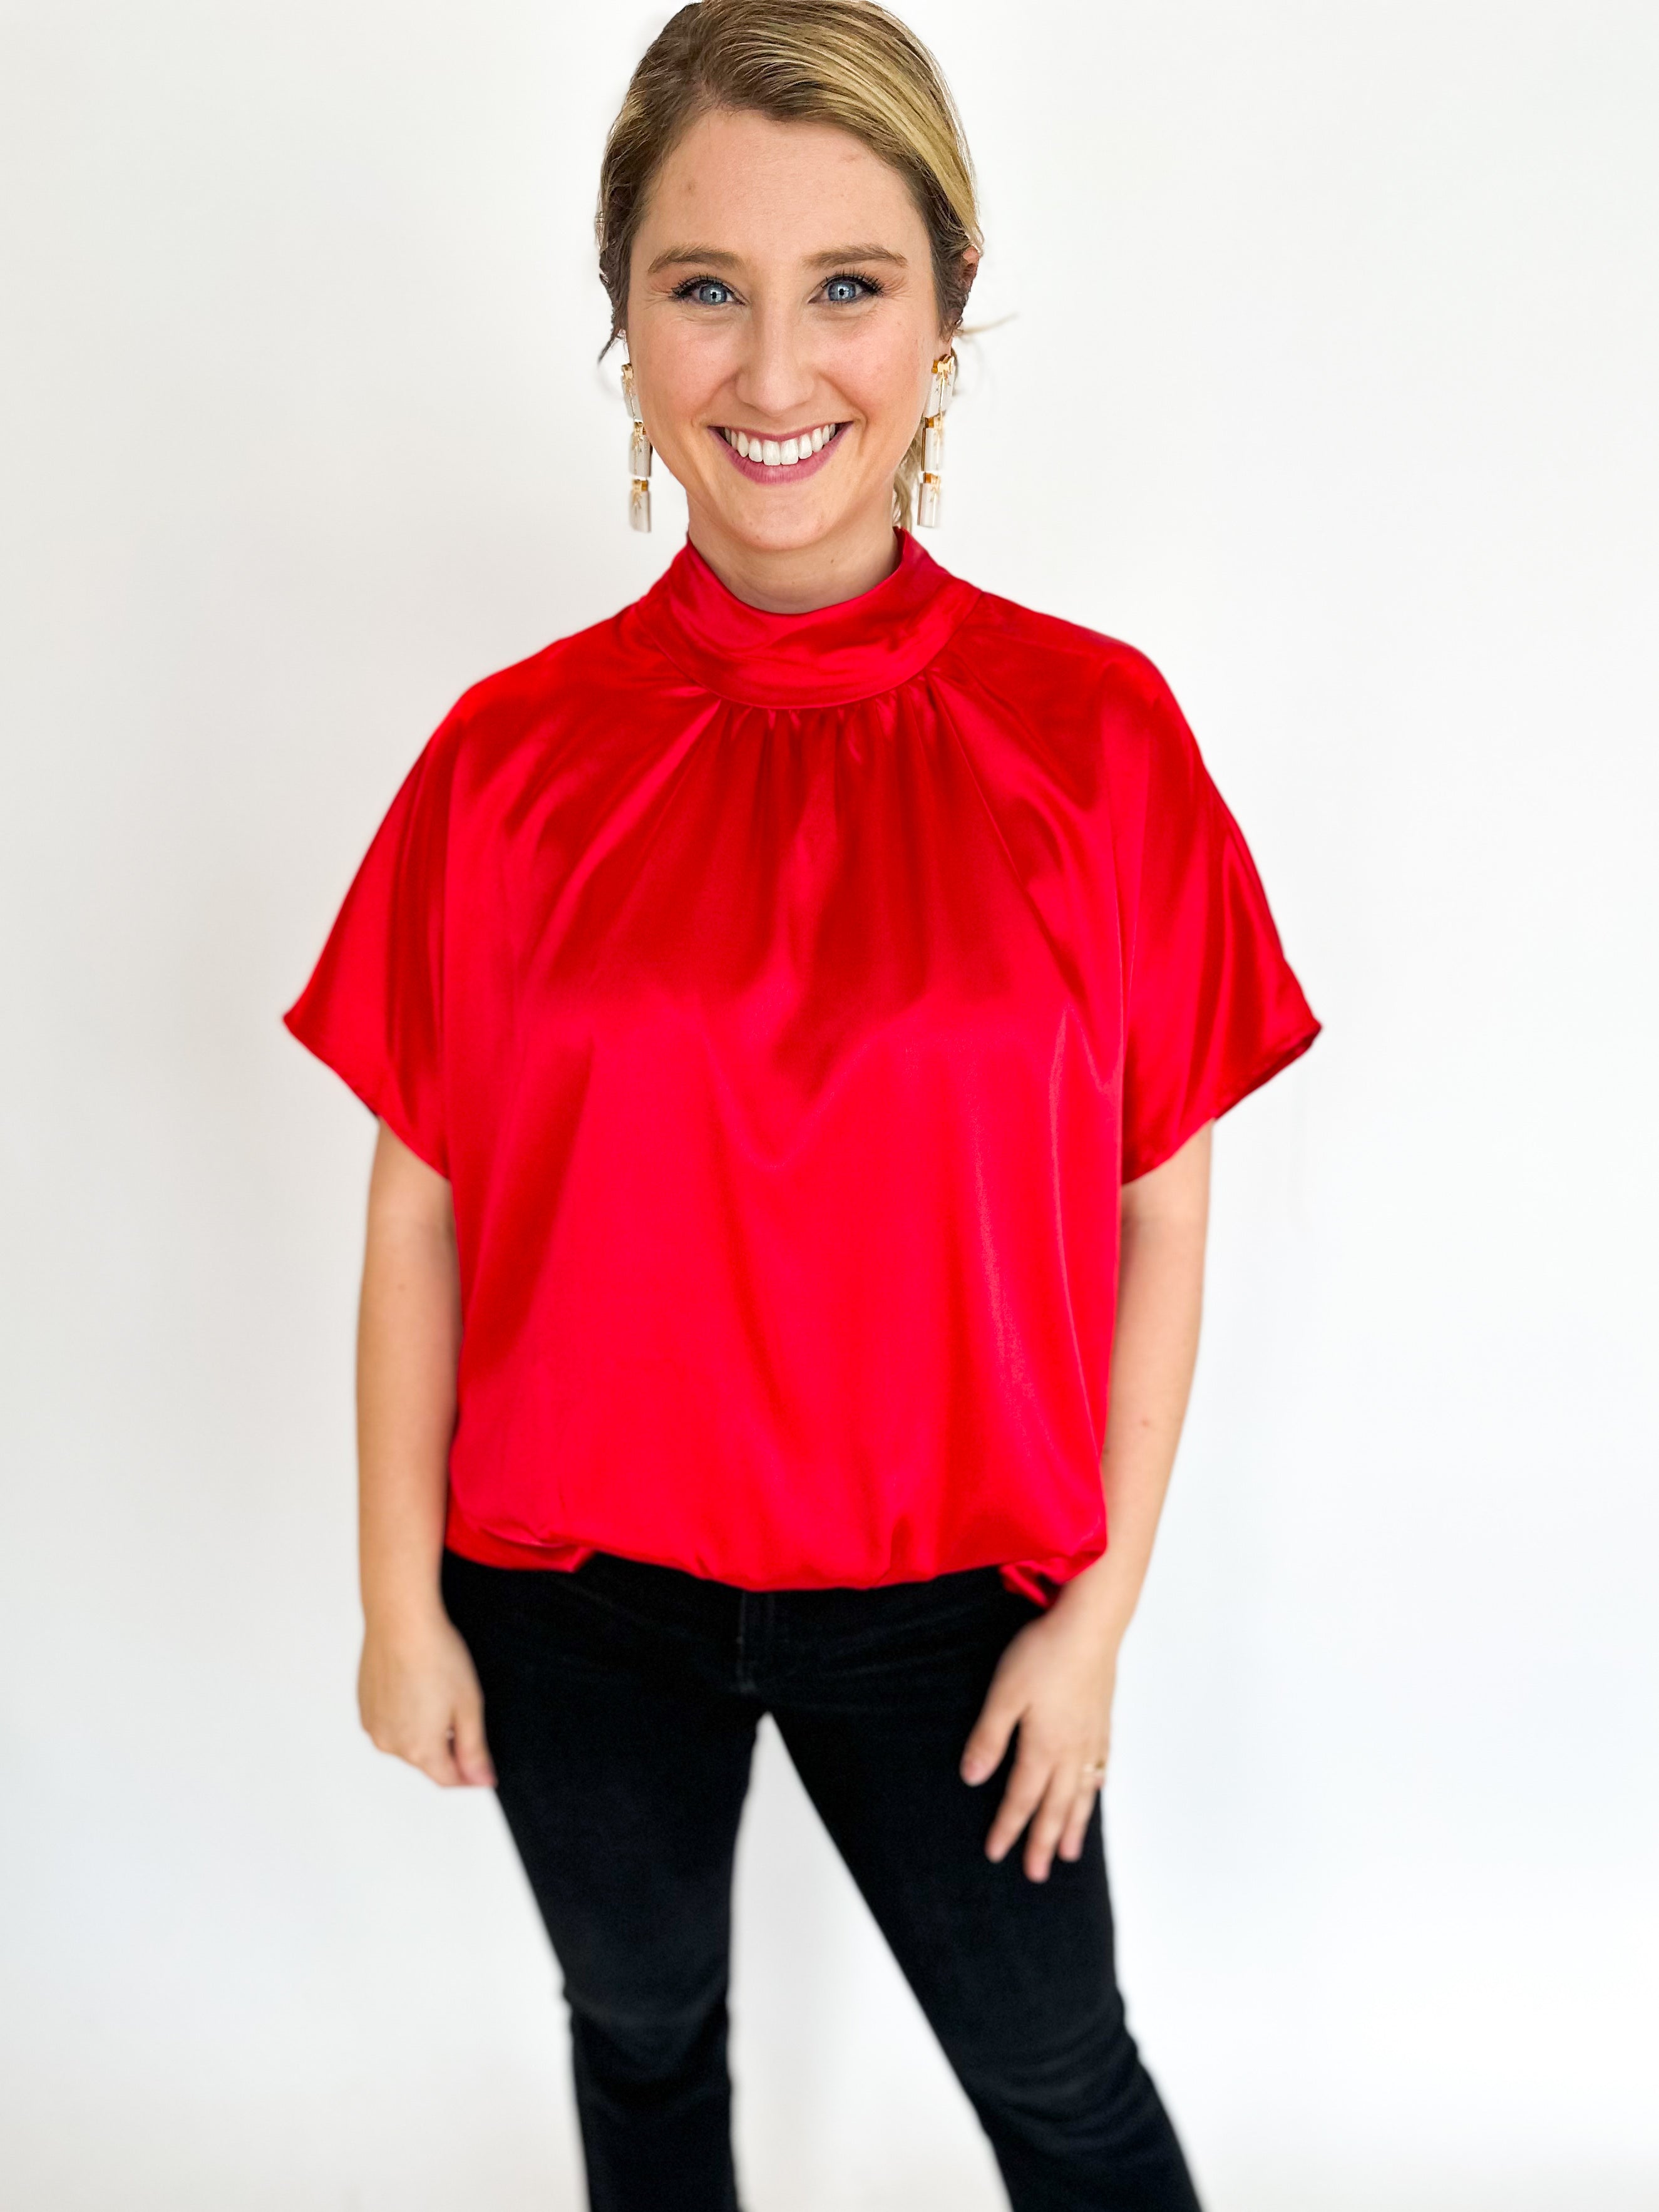 Charming Satin Blouse - Cherry Red-200 Fashion Blouses-ADRIENNE-July & June Women's Fashion Boutique Located in San Antonio, Texas